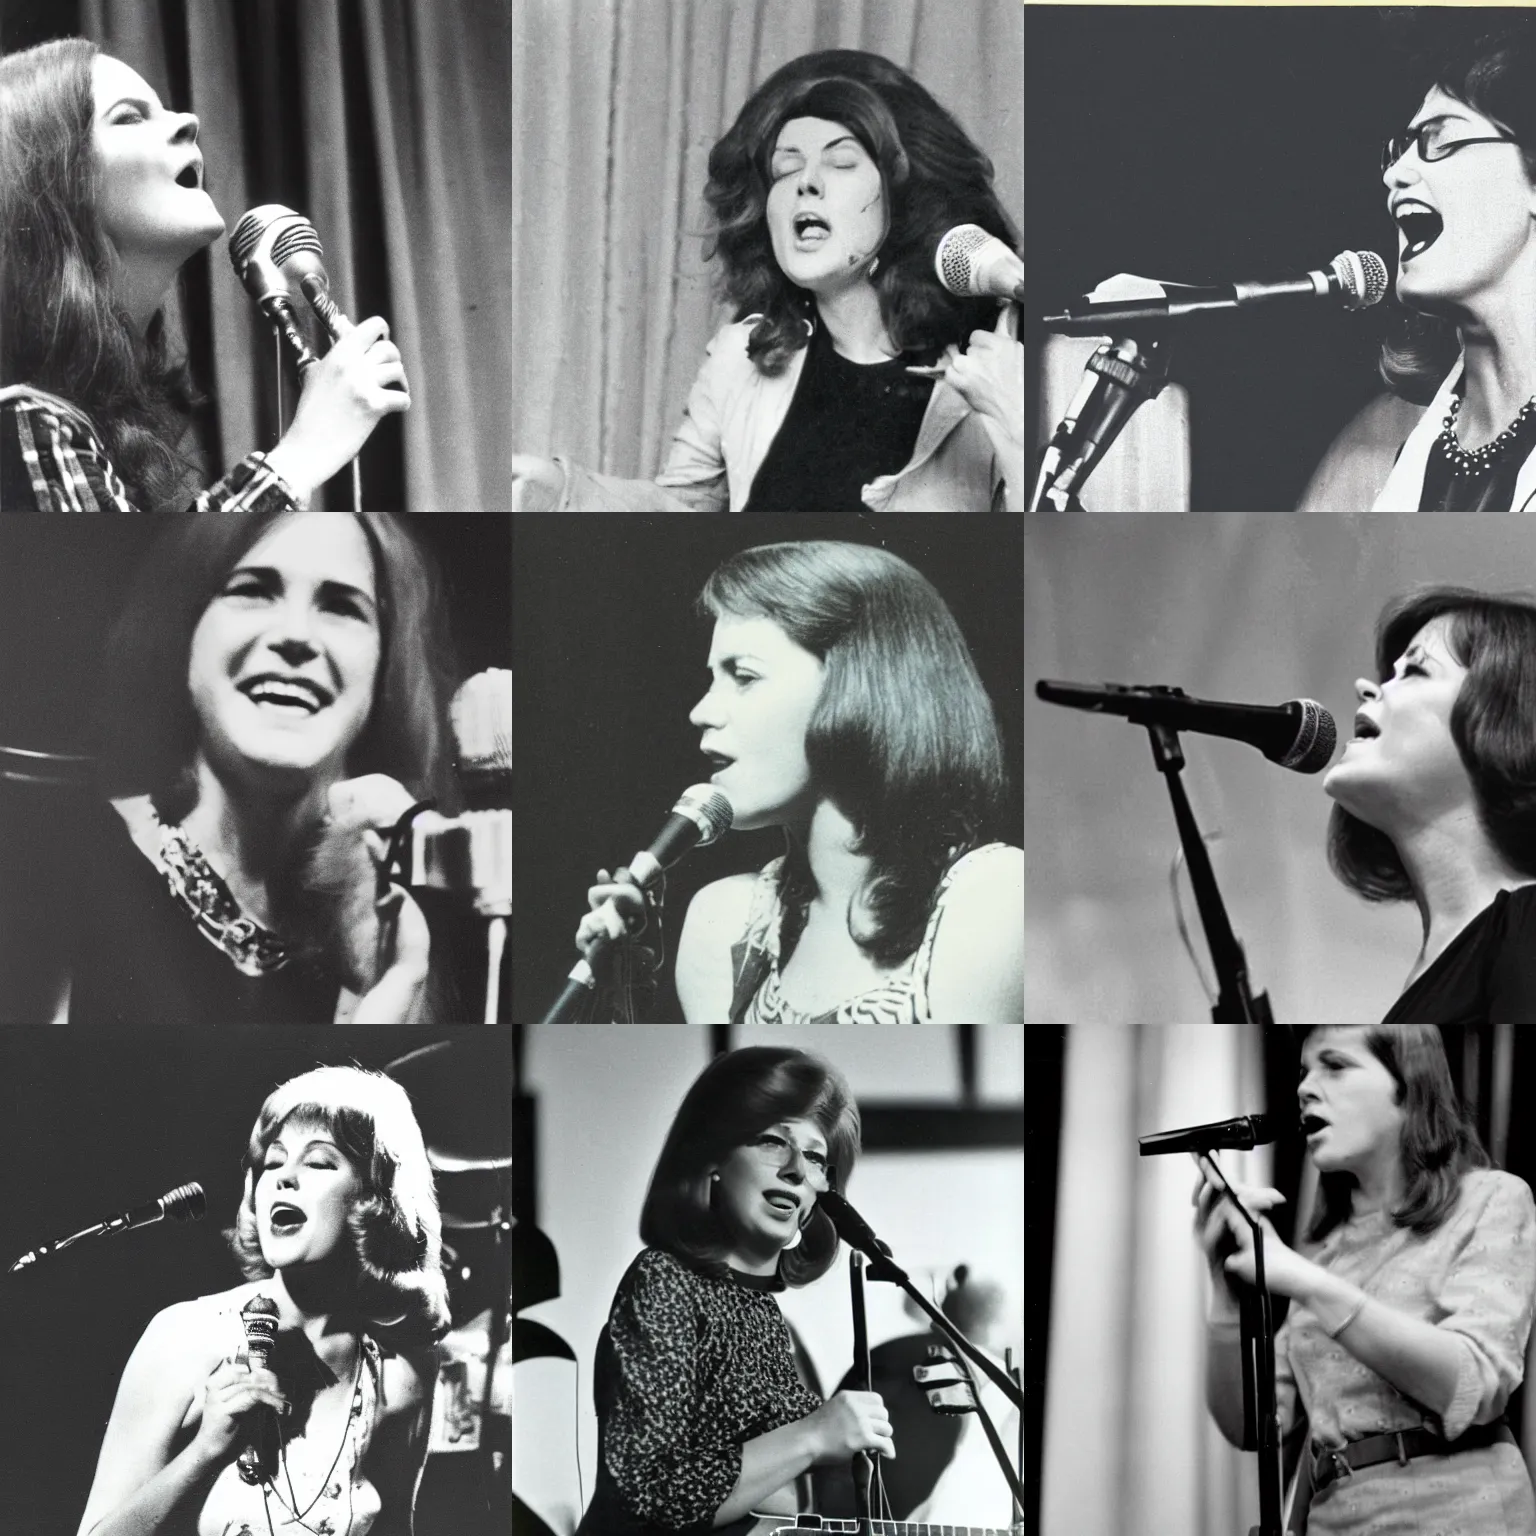 Prompt: Photograph of Barbara Acklin singing on stage, circa 1970s